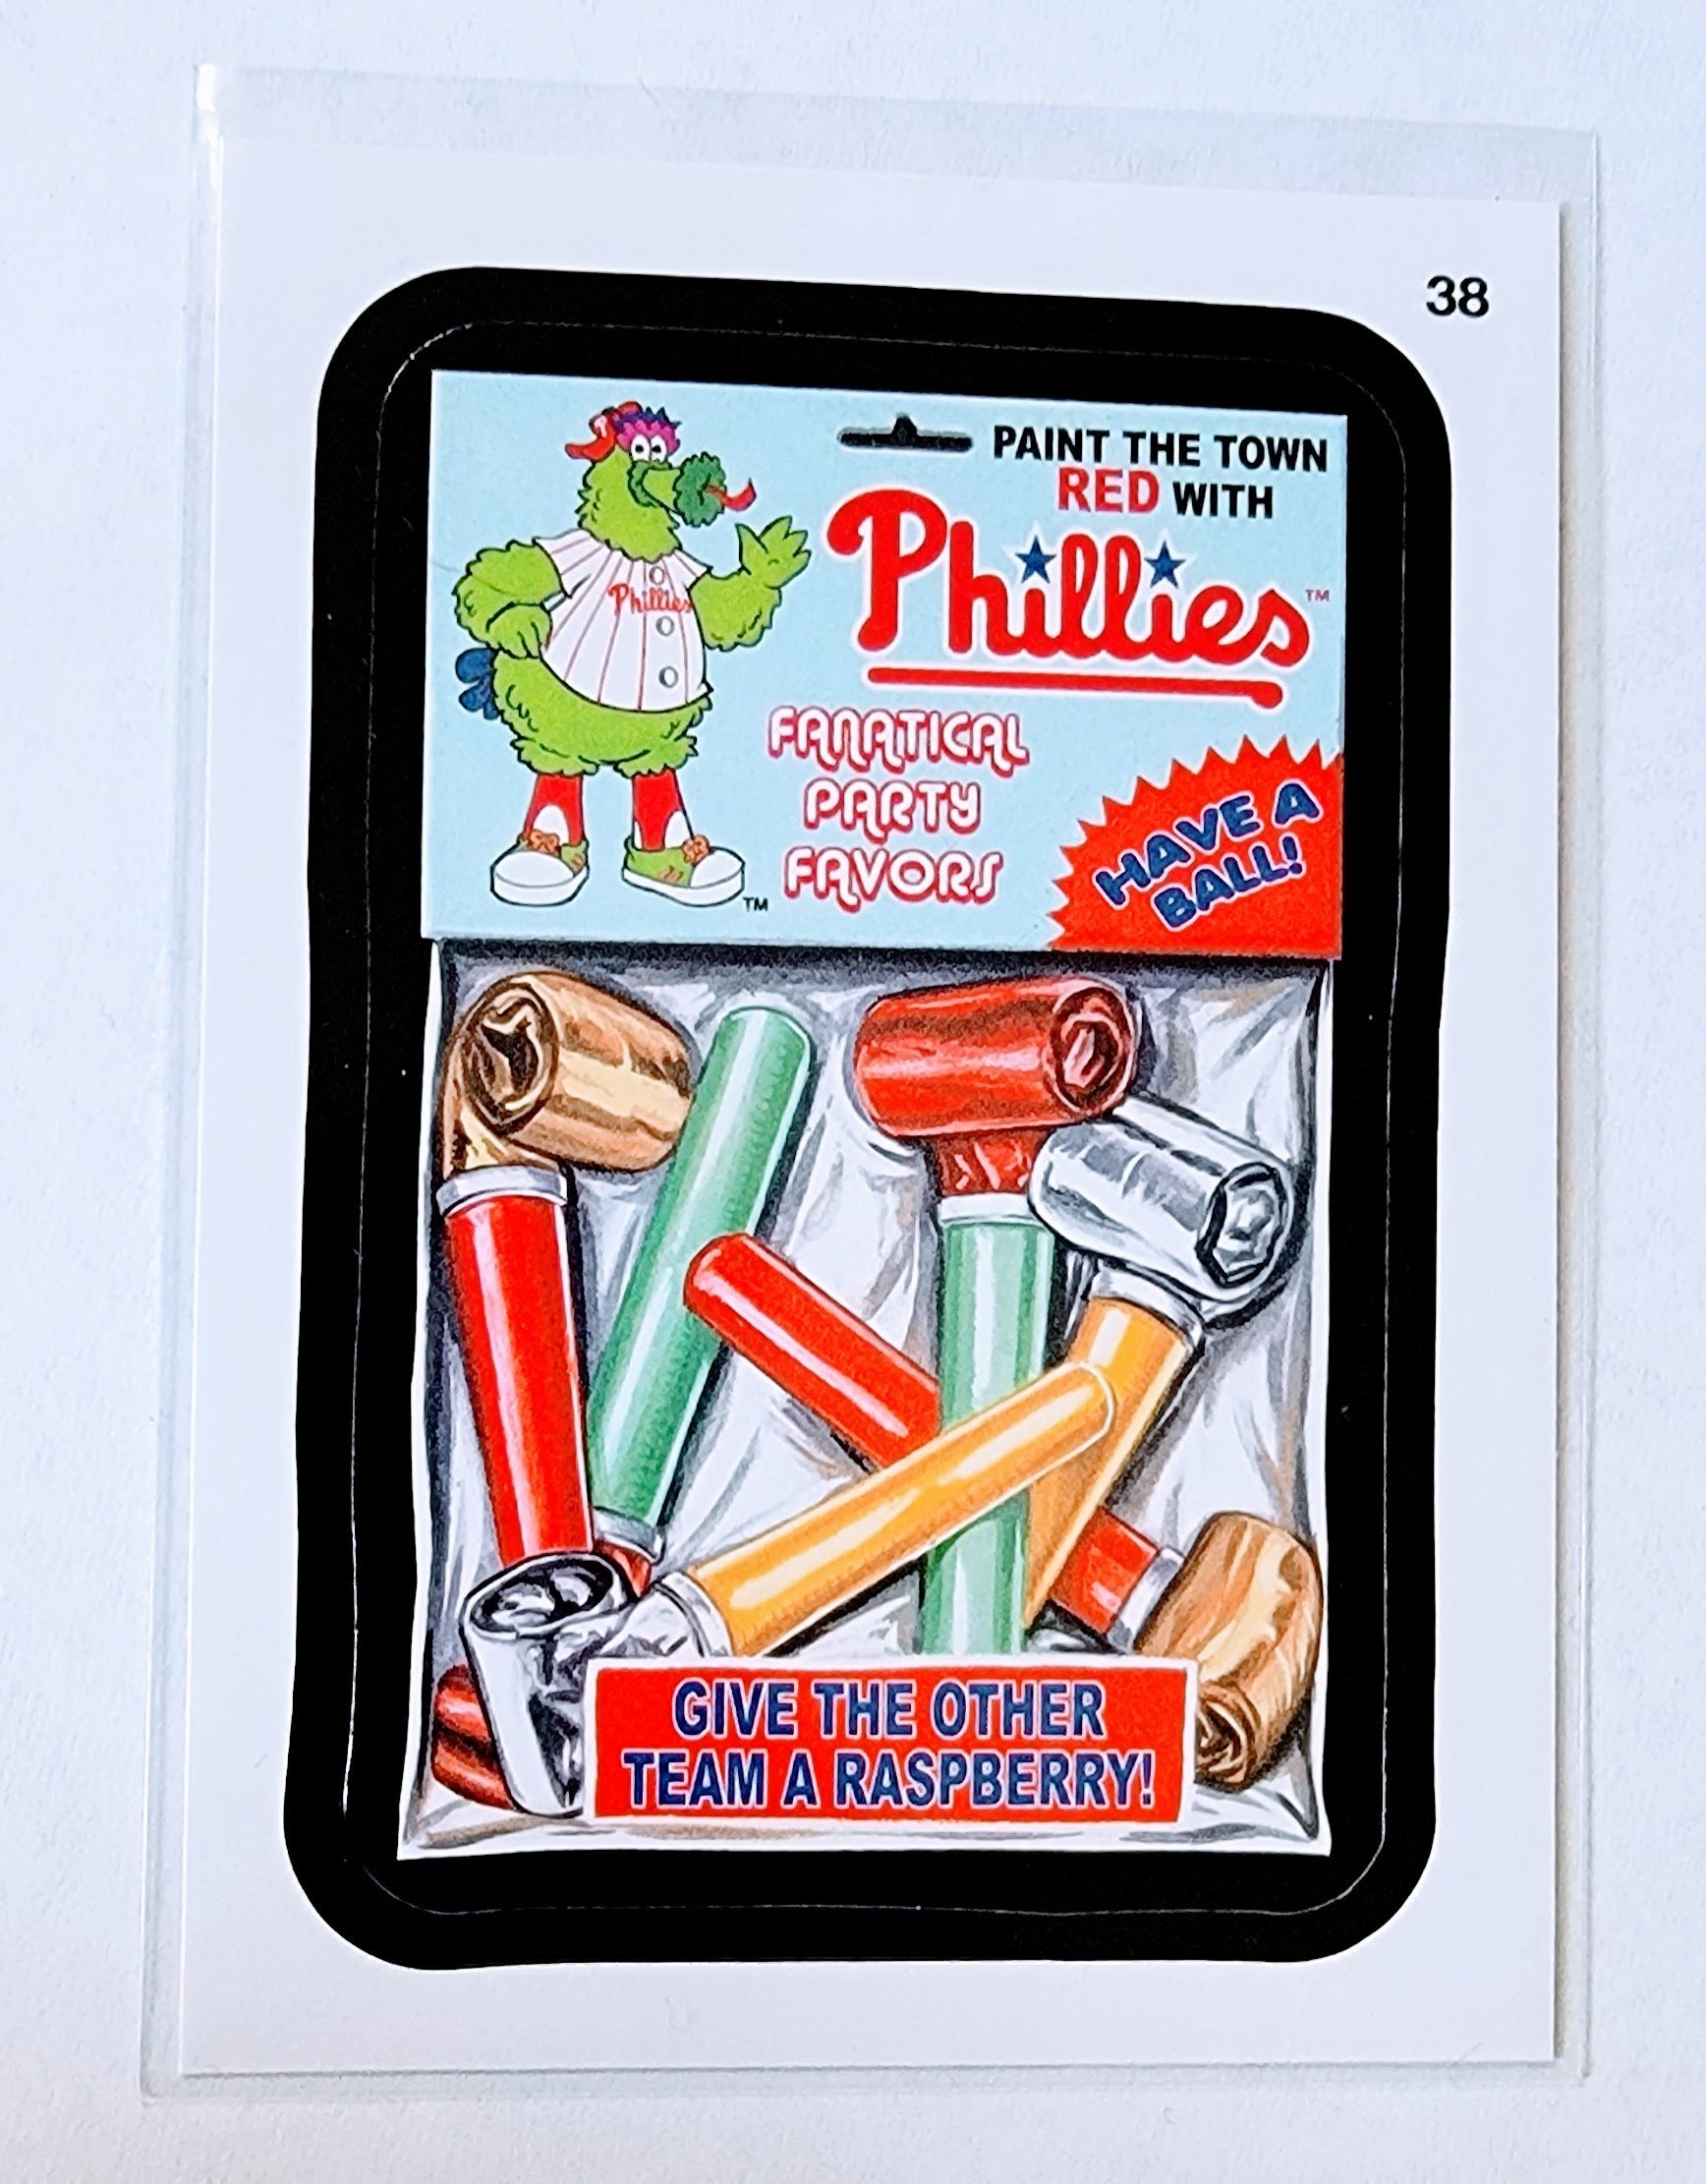 2016 Topps MLB Baseball Wacky Packages Phillies Fanatical Party Favors Sticker Trading Card MCSC1 simple Xclusive Collectibles   